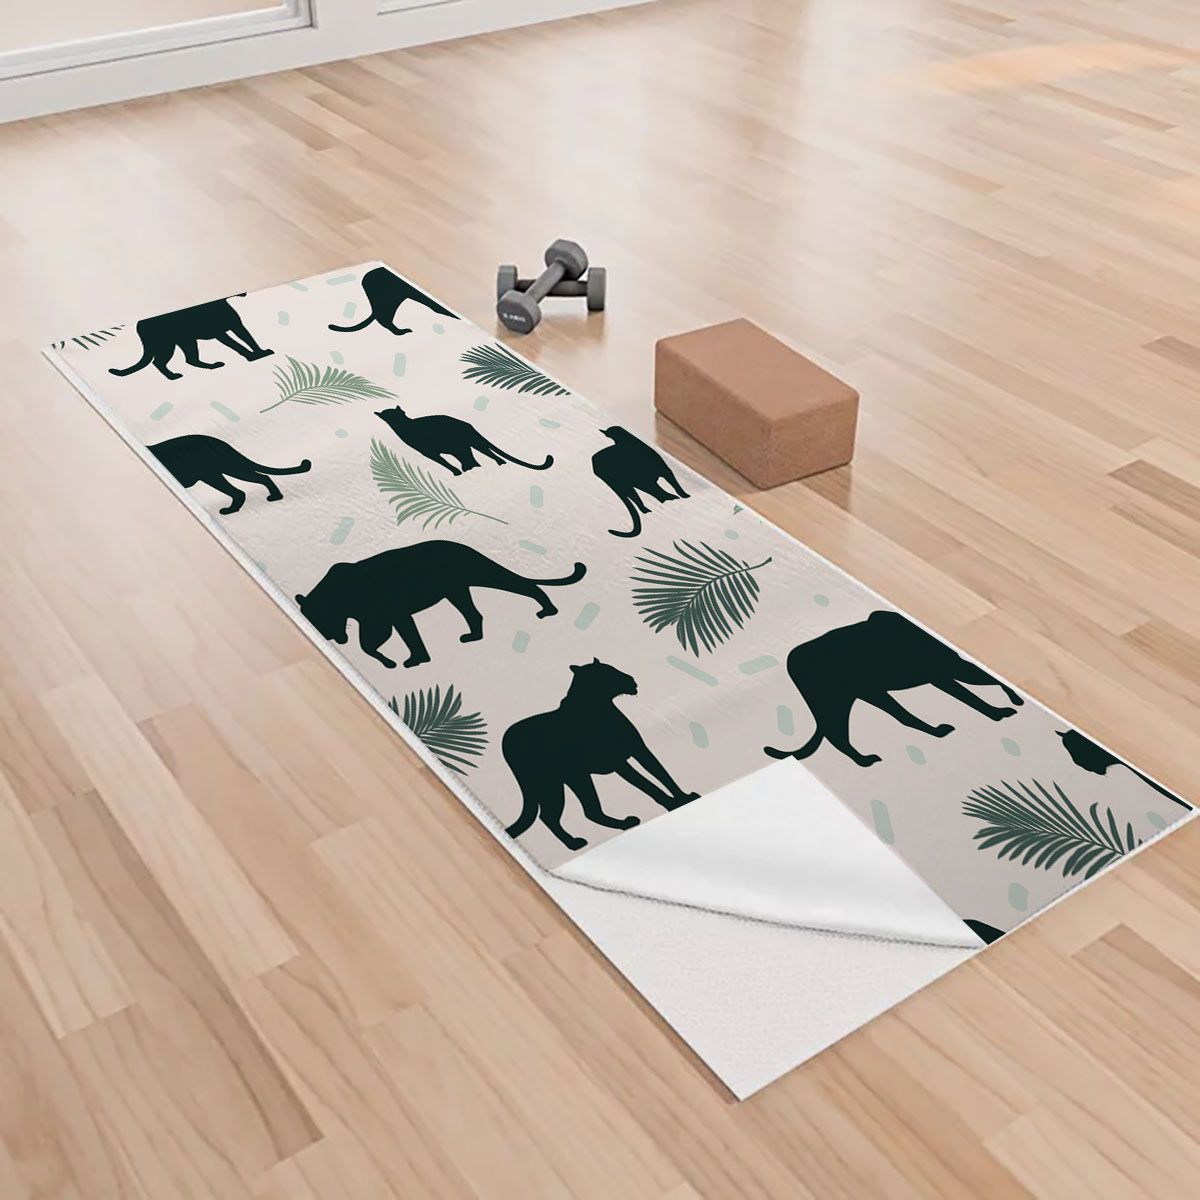 Green Panther Yoga Towels